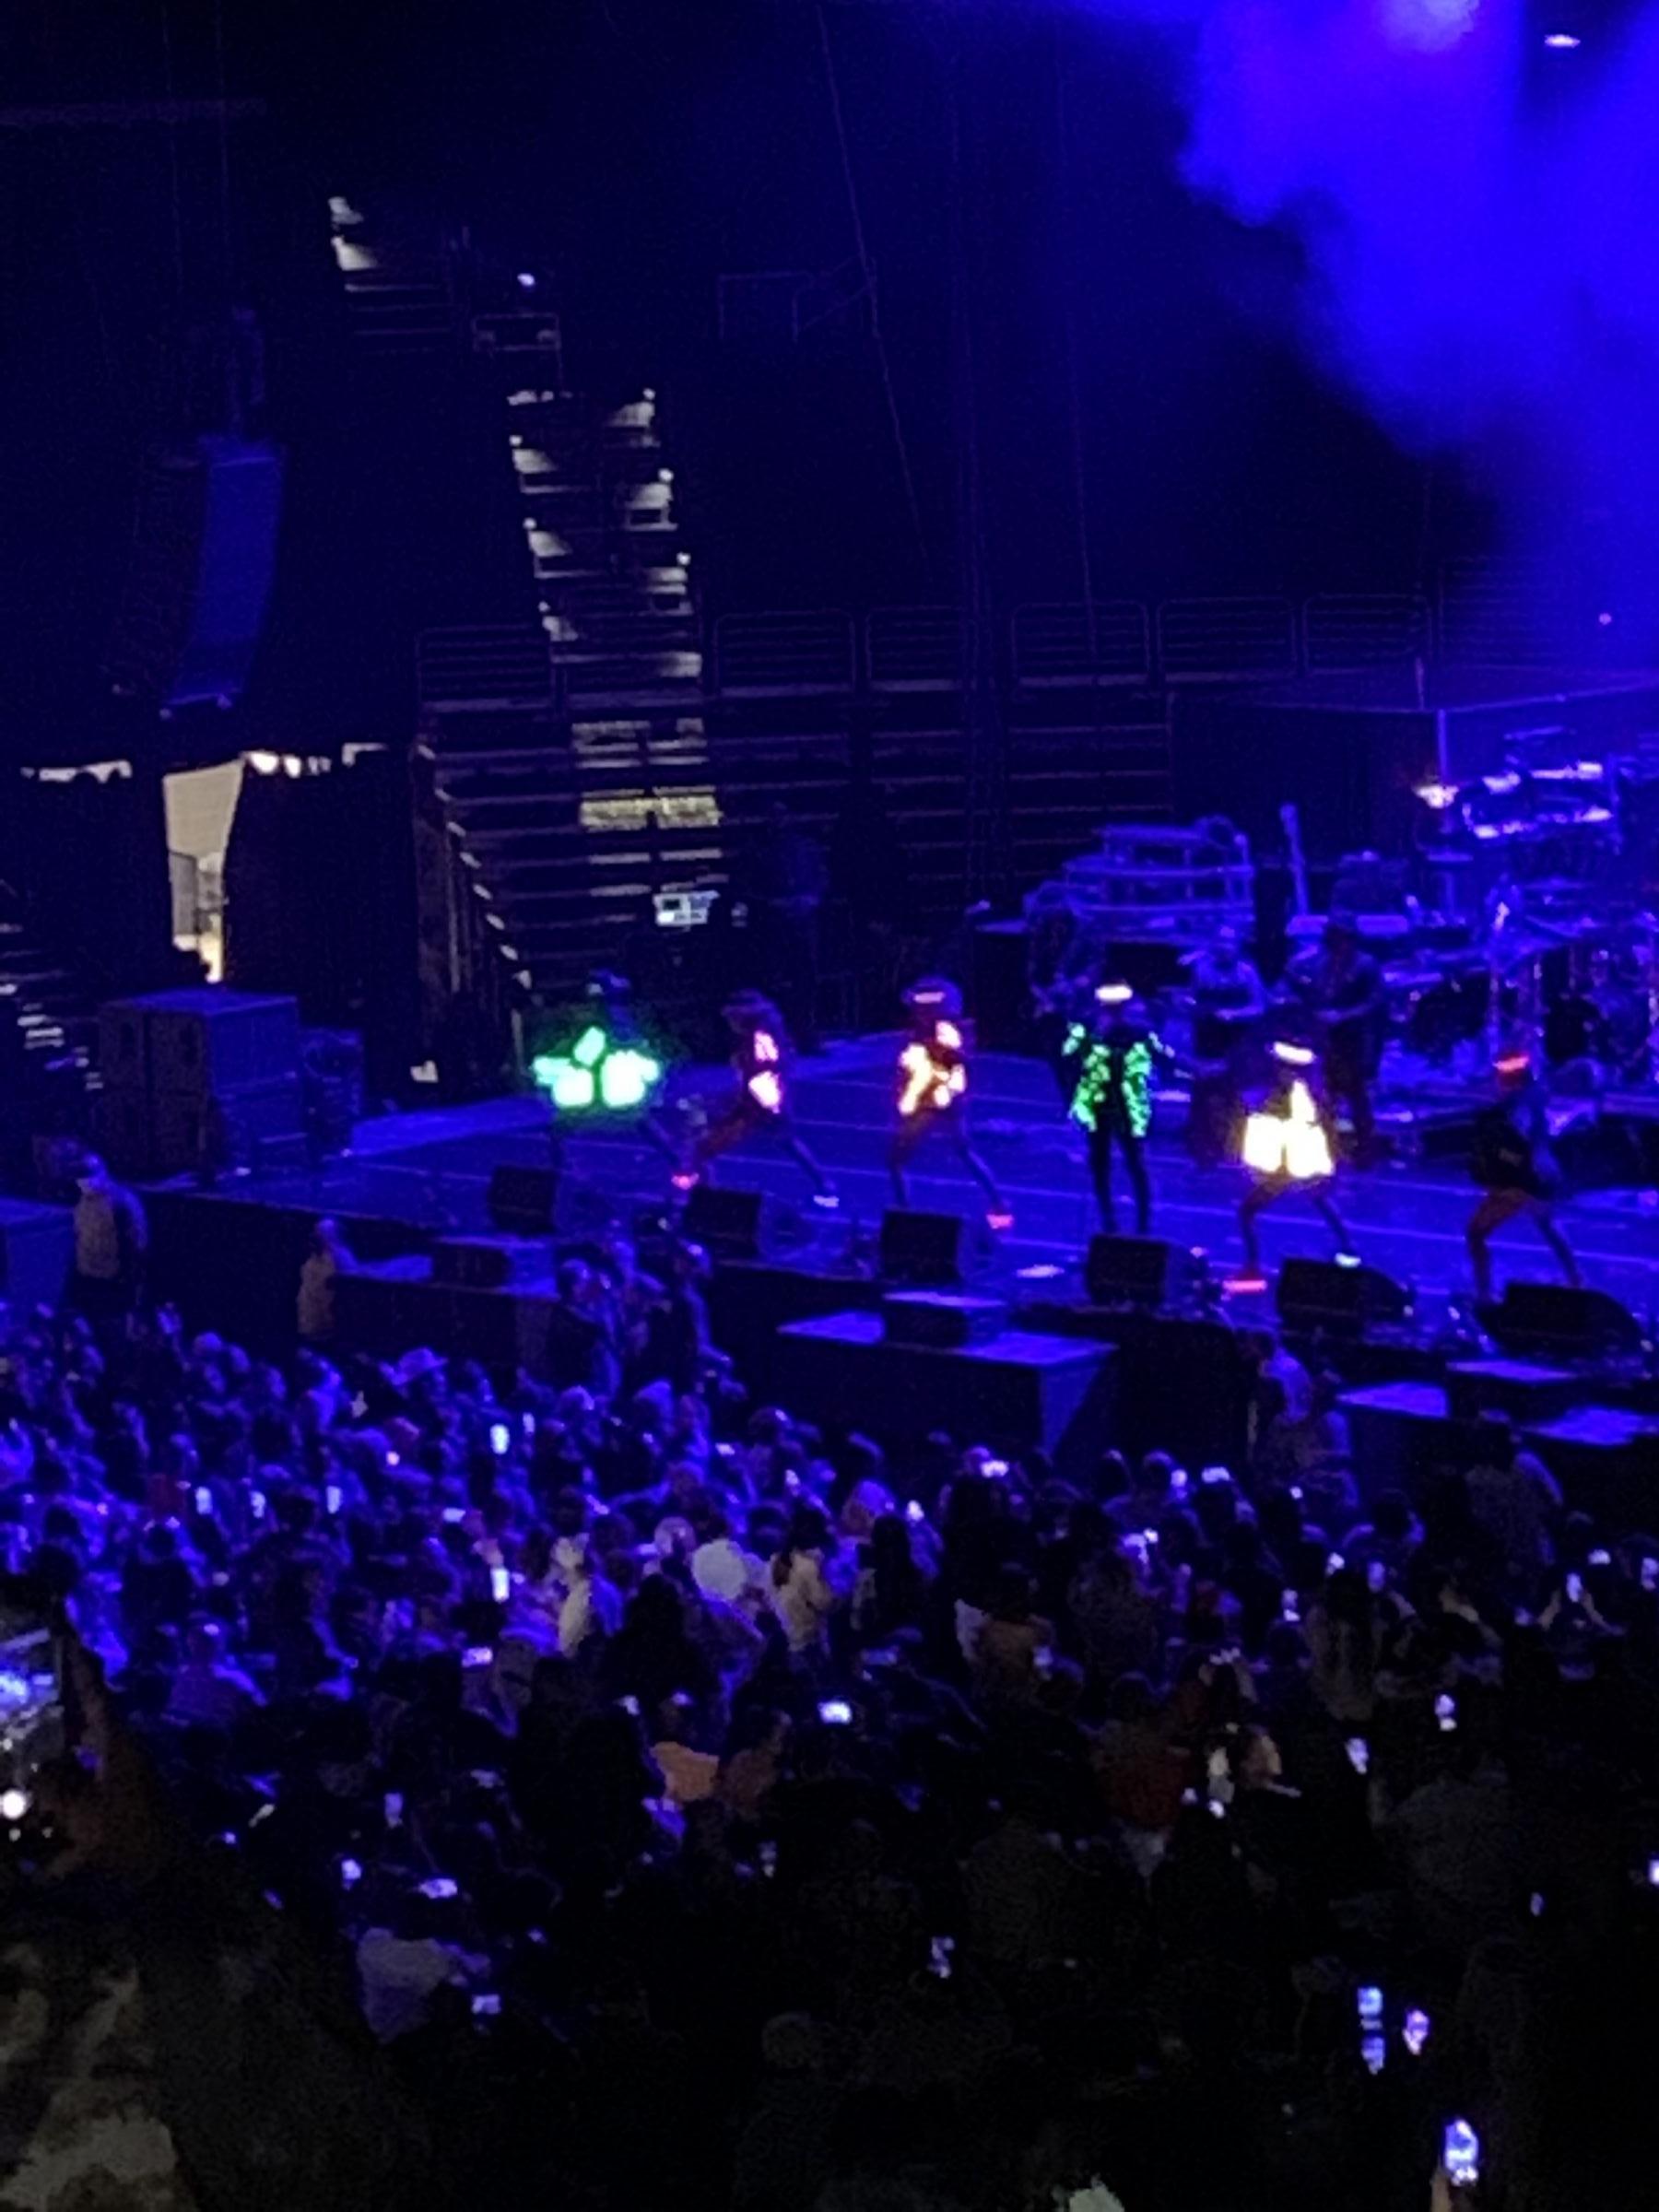 club 11, row 4 seat view  for concert - wells fargo center